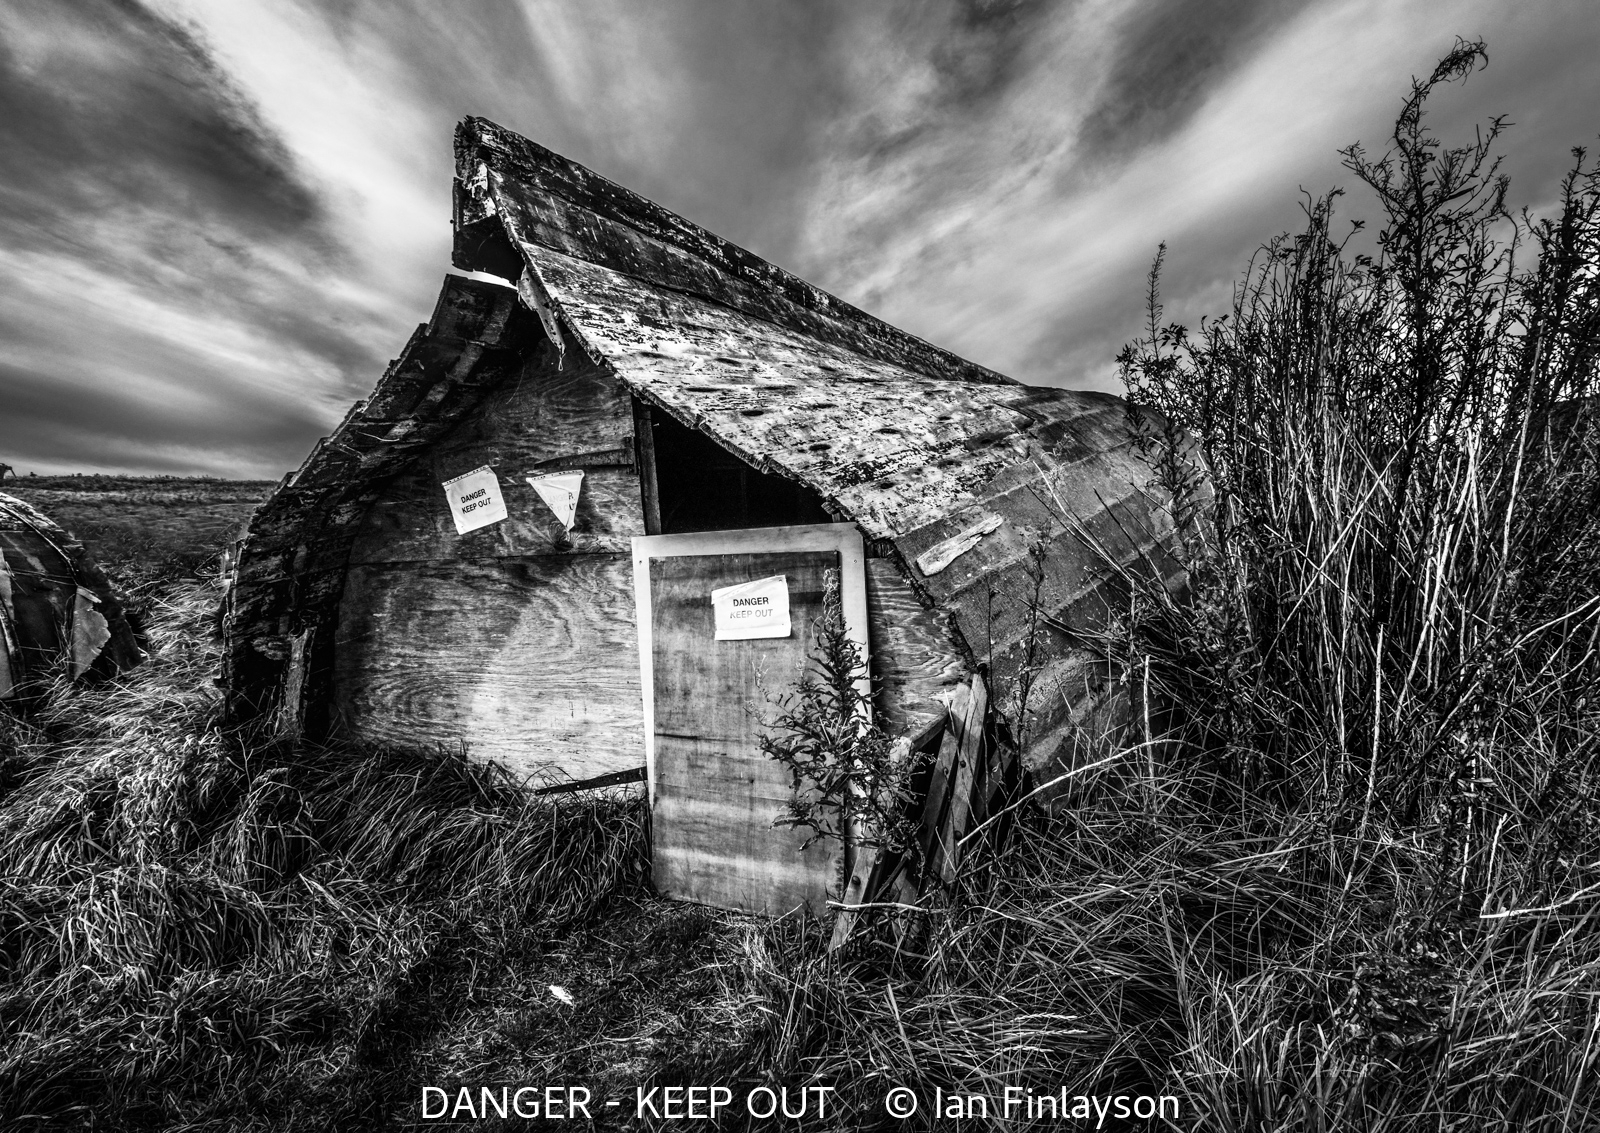 Ian Finlayson_DANGER - KEEP OUT